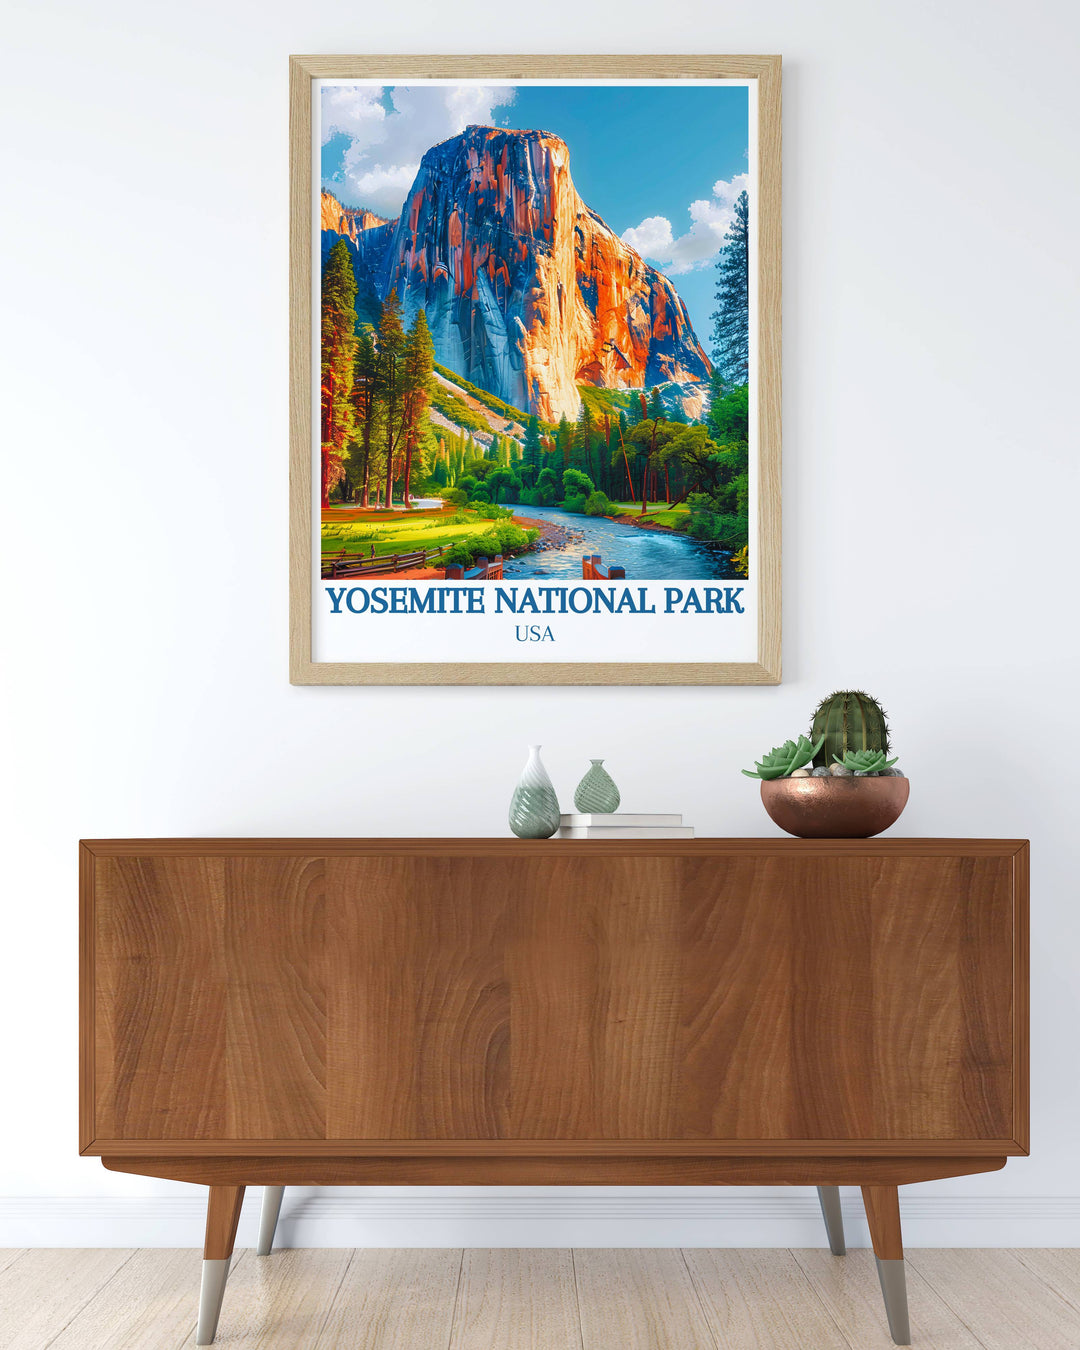 Yosemite National Park travel poster highlighting the dramatic scenery and towering waterfalls, a beautiful addition to any room and a celebration of the great outdoors.